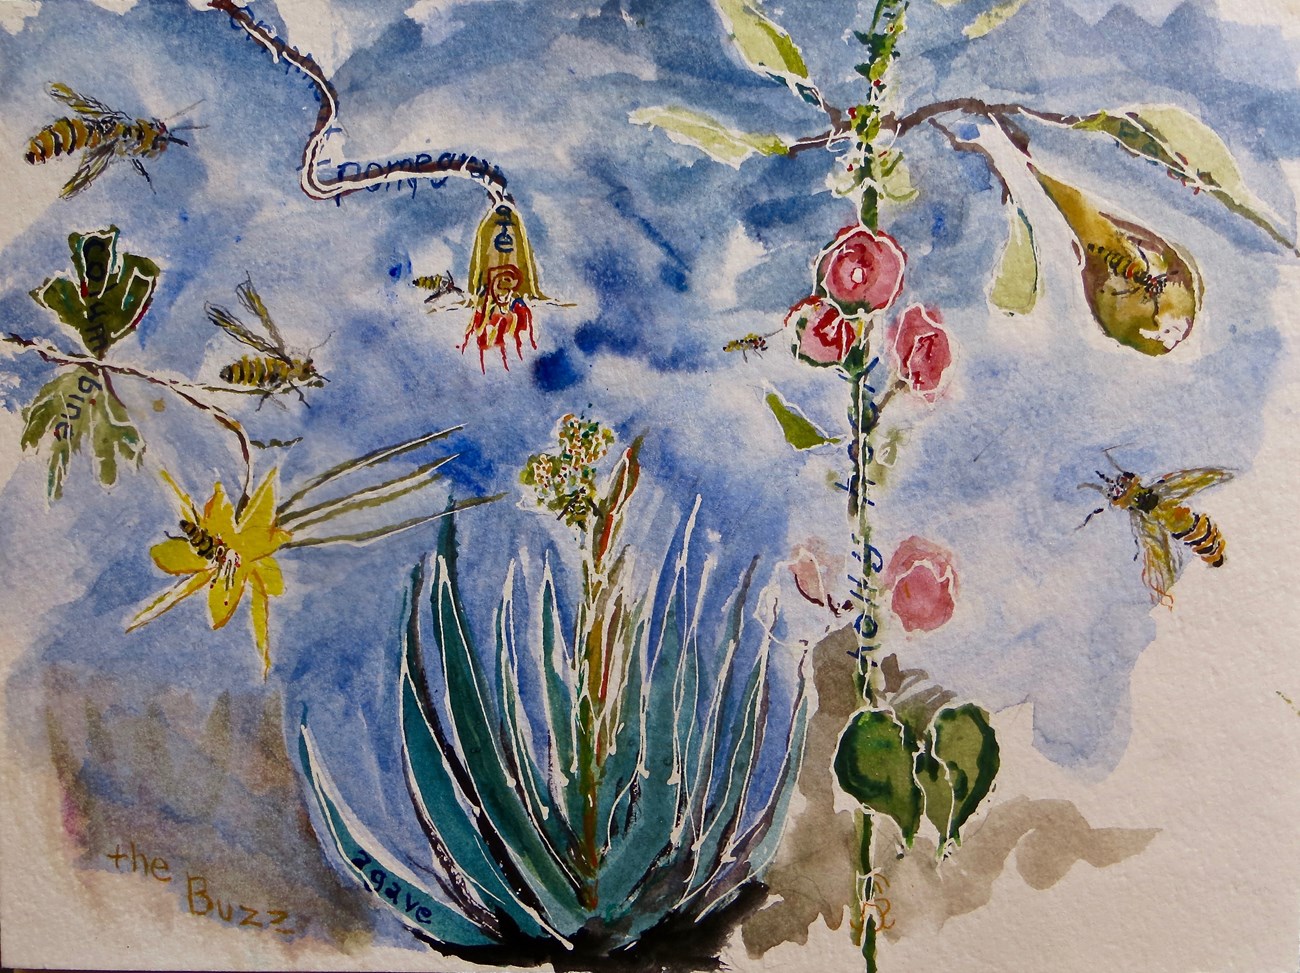 Watercolor painting of desert plants and insects.